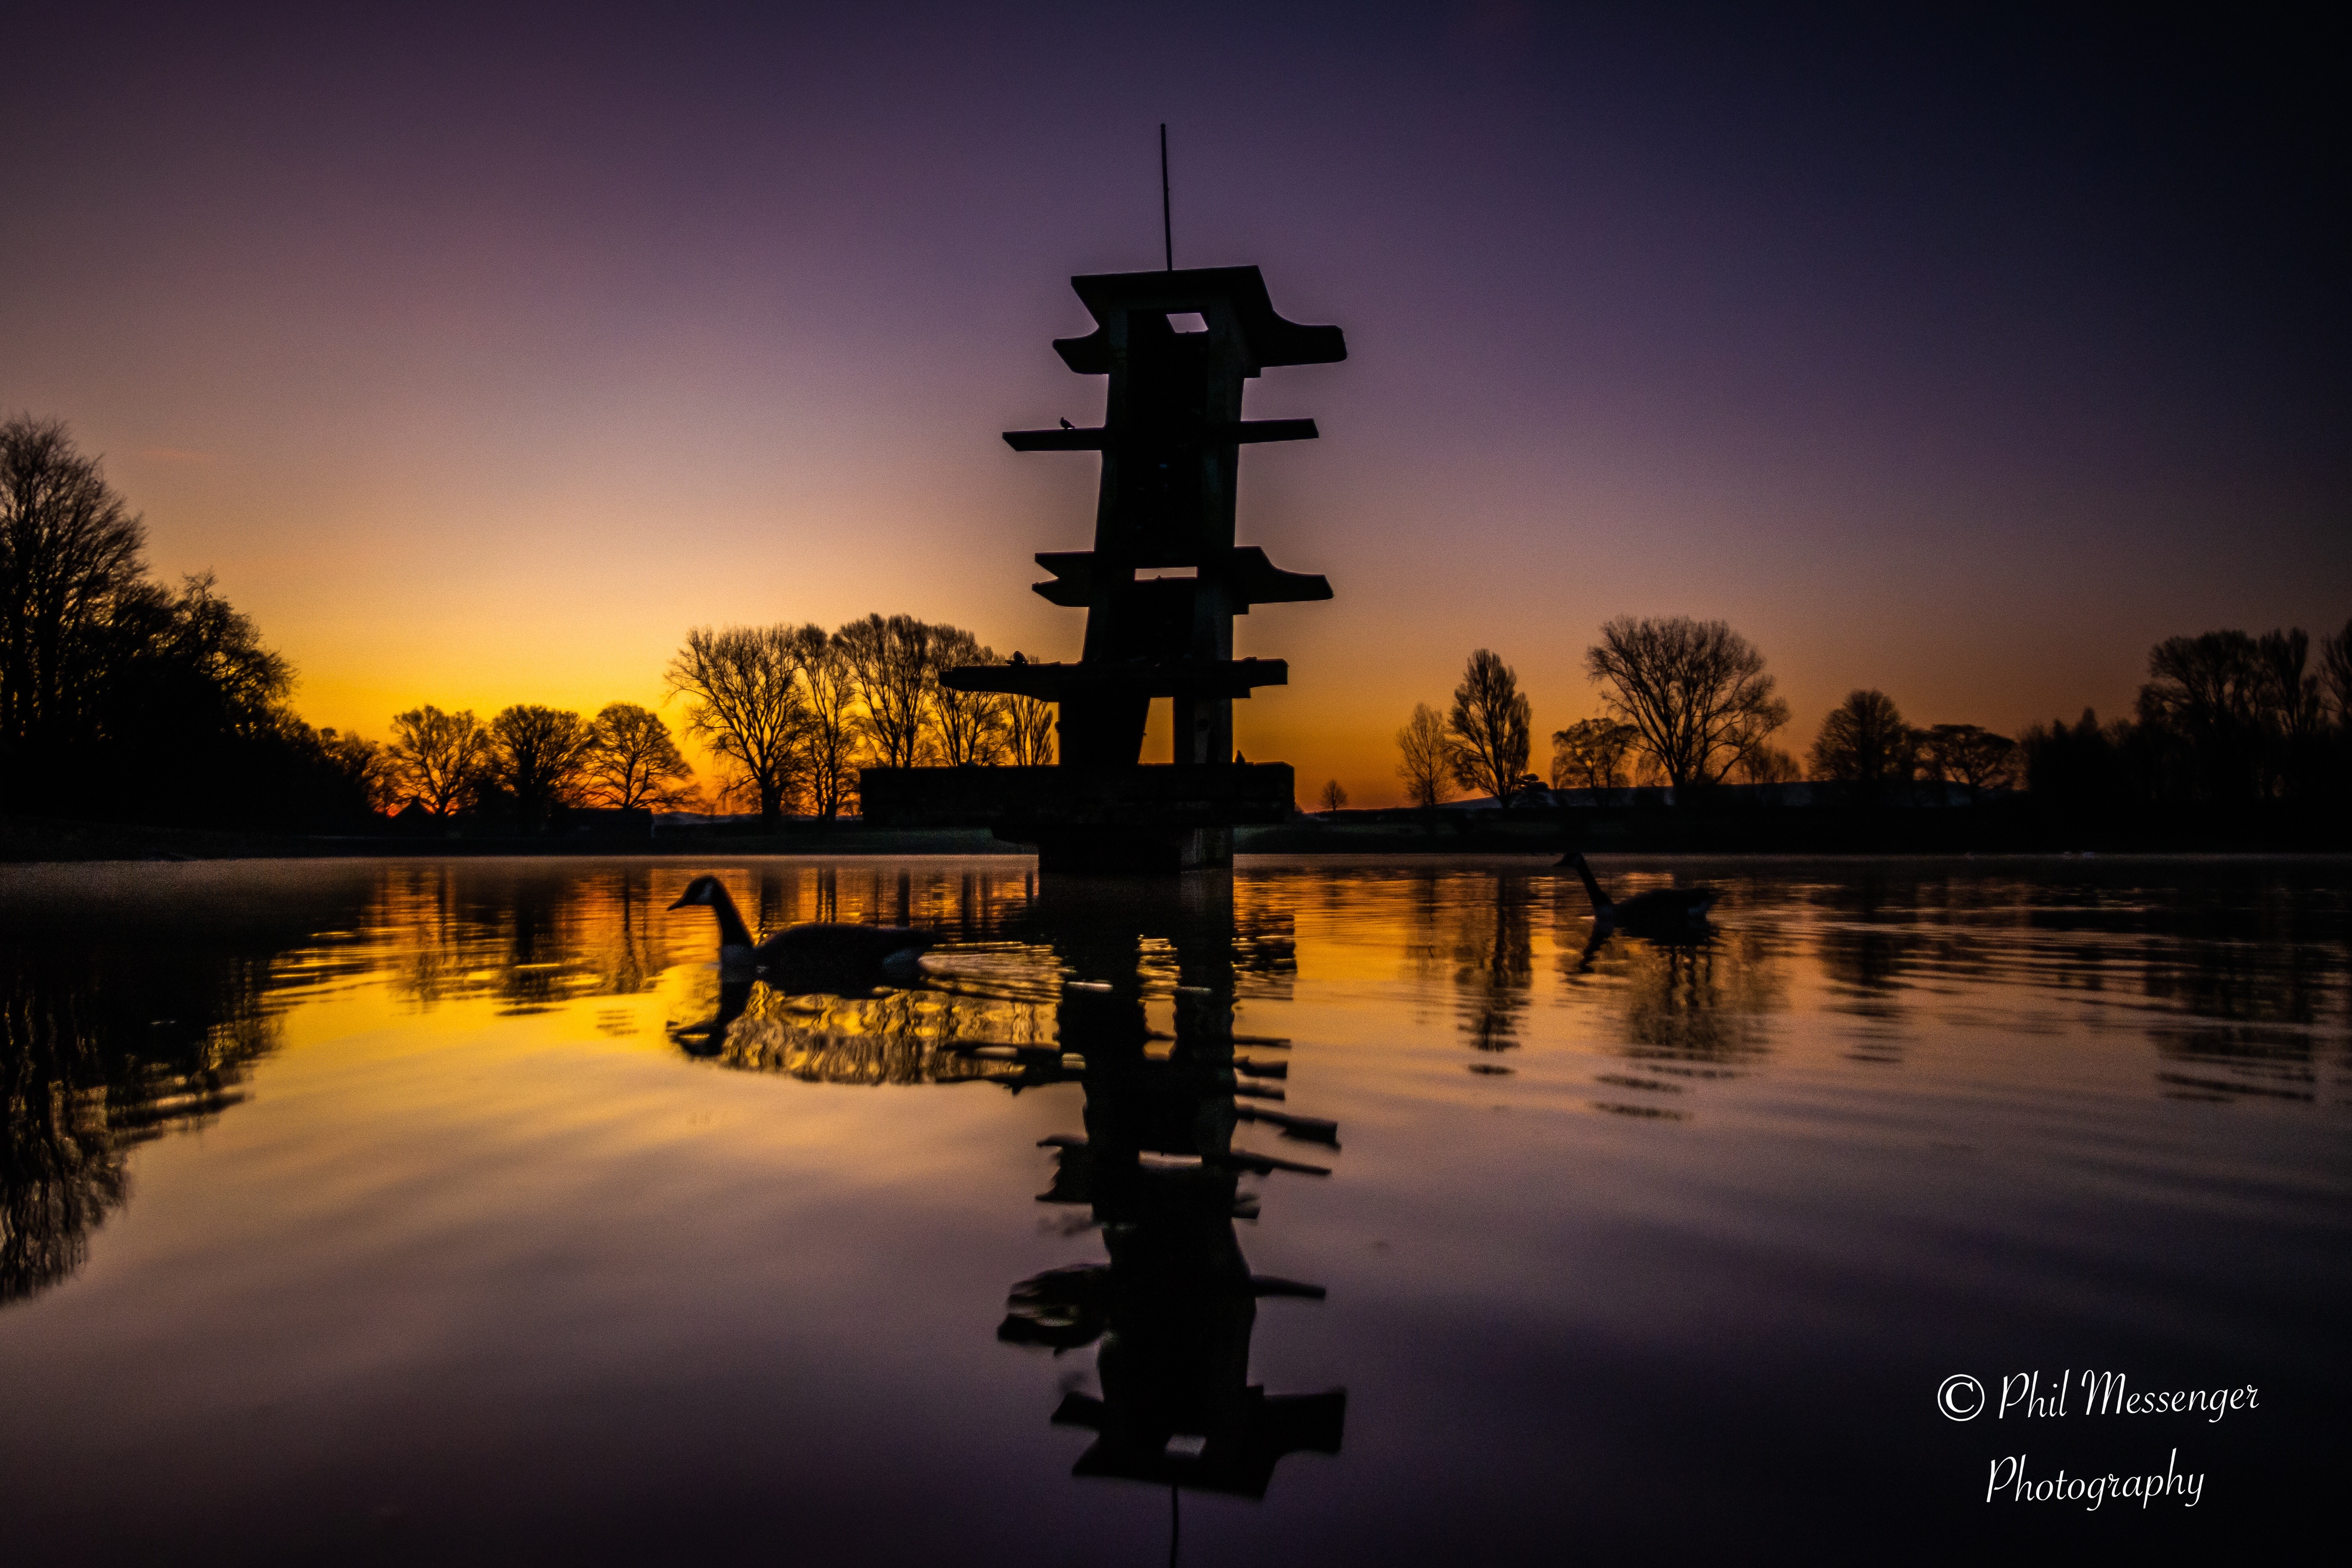 Early morning shot at Coate water, Swindon.